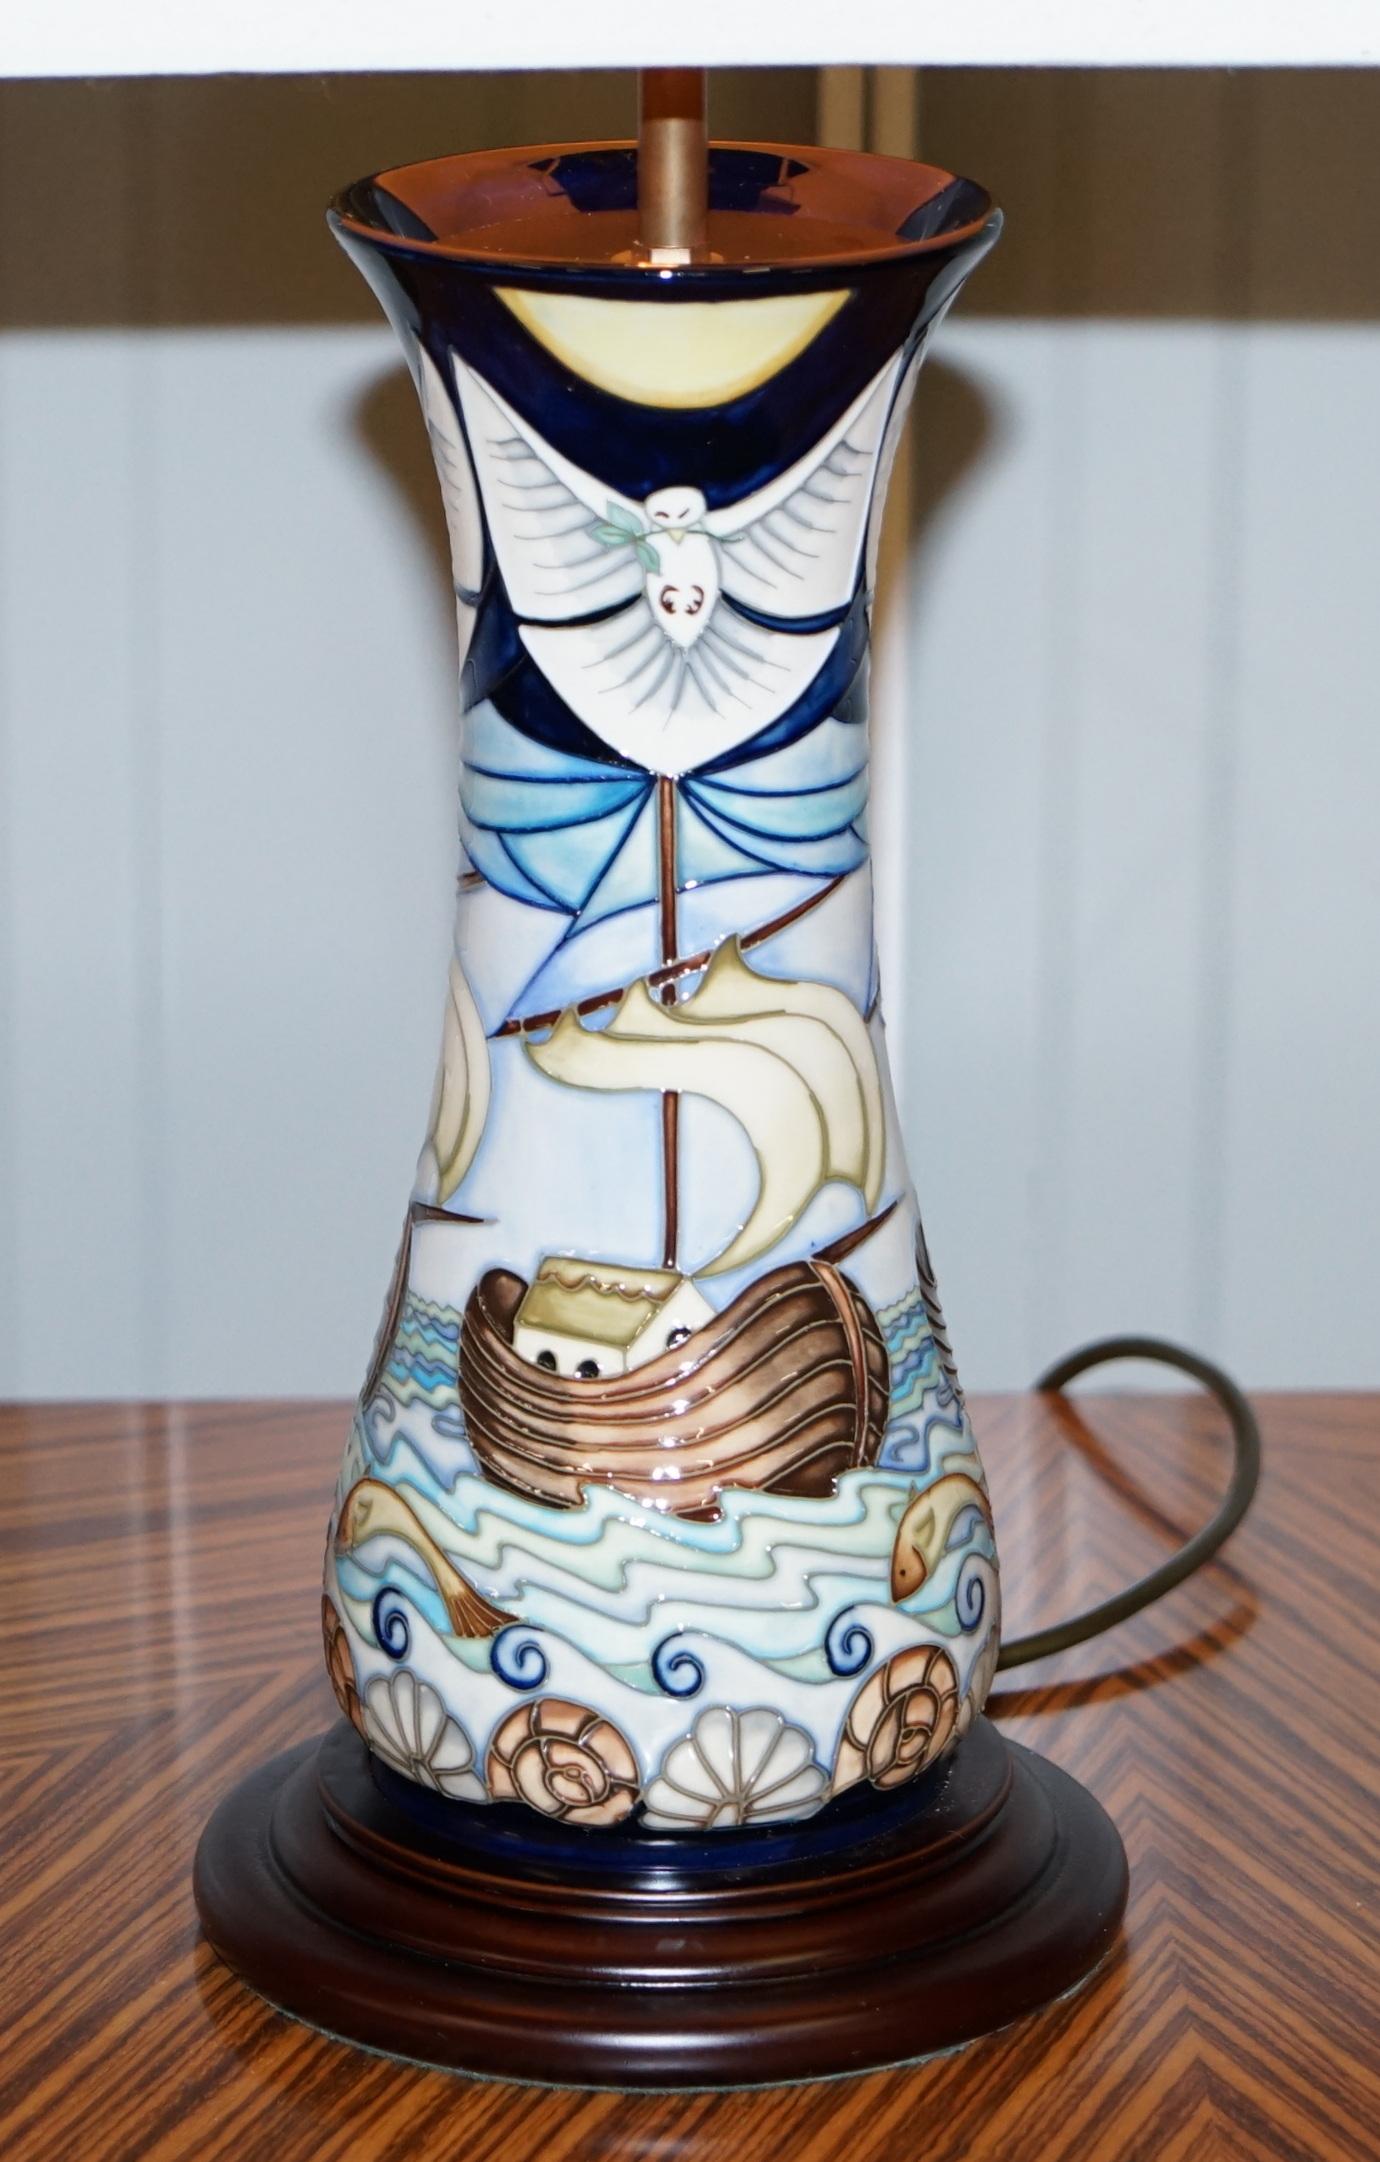 Wimbledon-Furniture

Wimbledon-Furniture is delighted to offer for sale this absolutely stunning Moorcroft pottery hand painted winds of change table lamp

Please note the delivery fee listed is just a guide, it covers within the M25 only, for